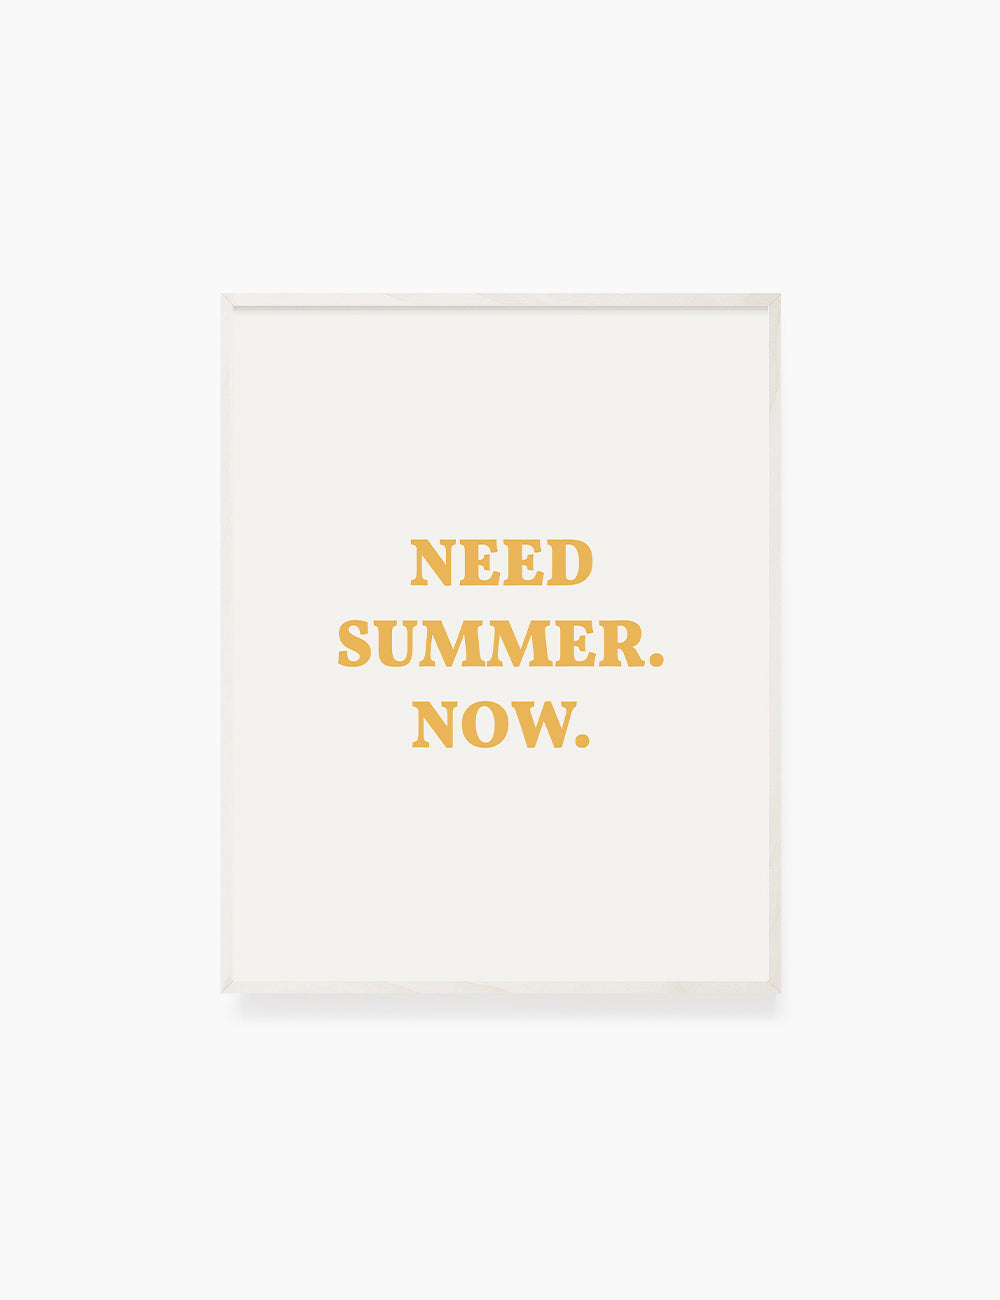 NEED SUMMER. NOW. Summer Quote. Yellow. Printable Wall Art Quote. - PAPER MOON Art & Design